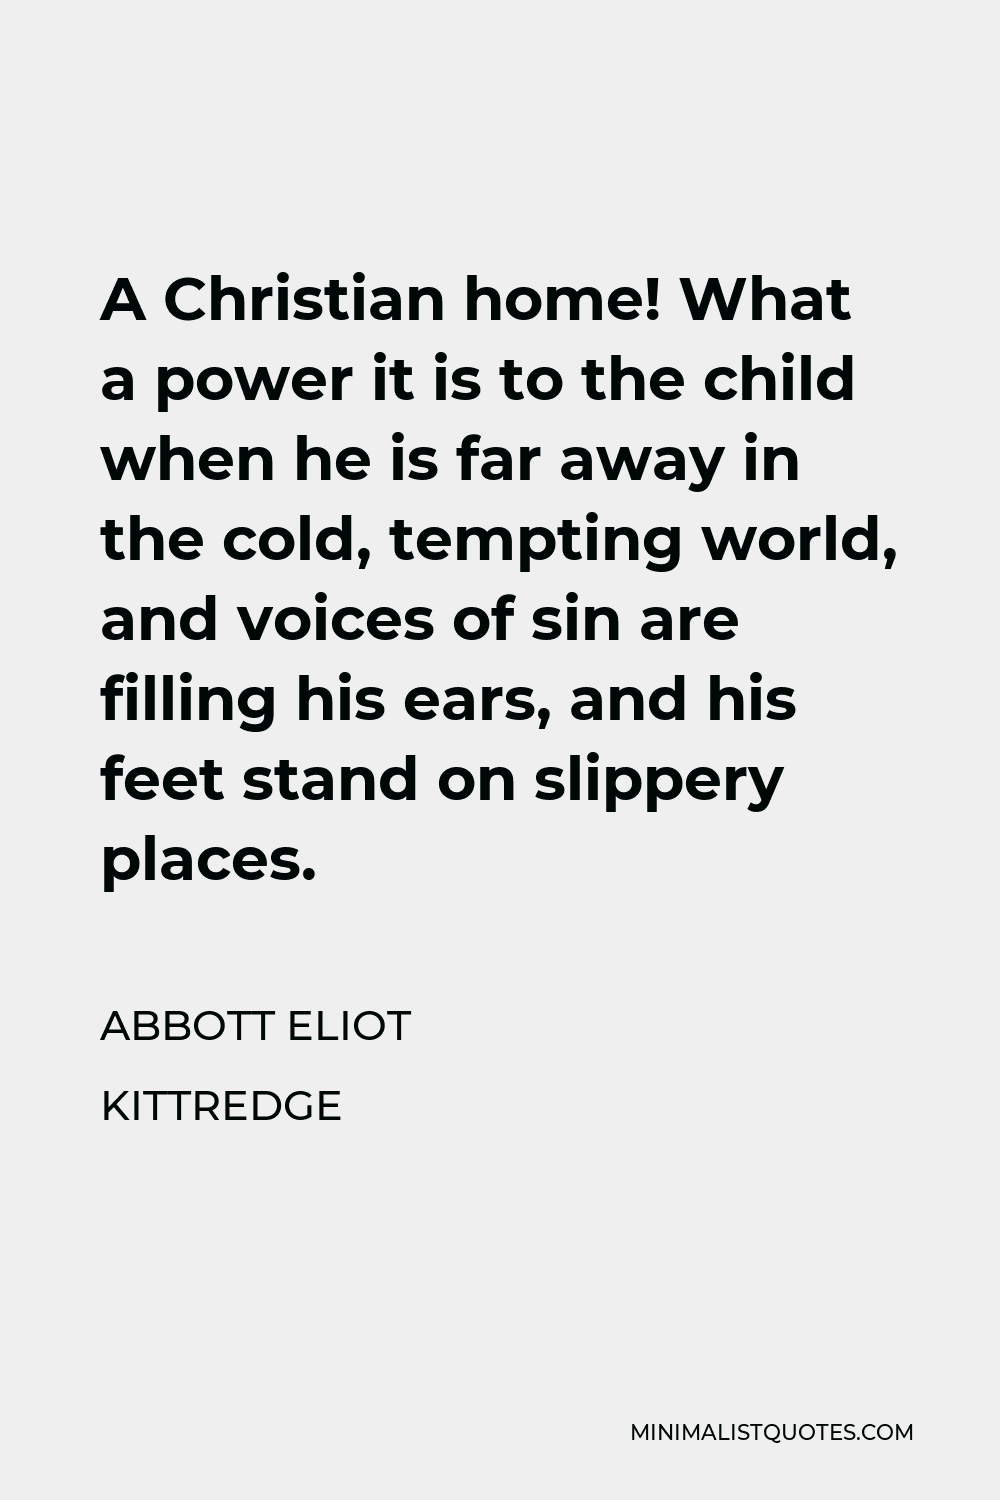 Abbott Eliot Kittredge Quote - A Christian home! What a power it is to the child when he is far away in the cold, tempting world, and voices of sin are filling his ears, and his feet stand on slippery places.